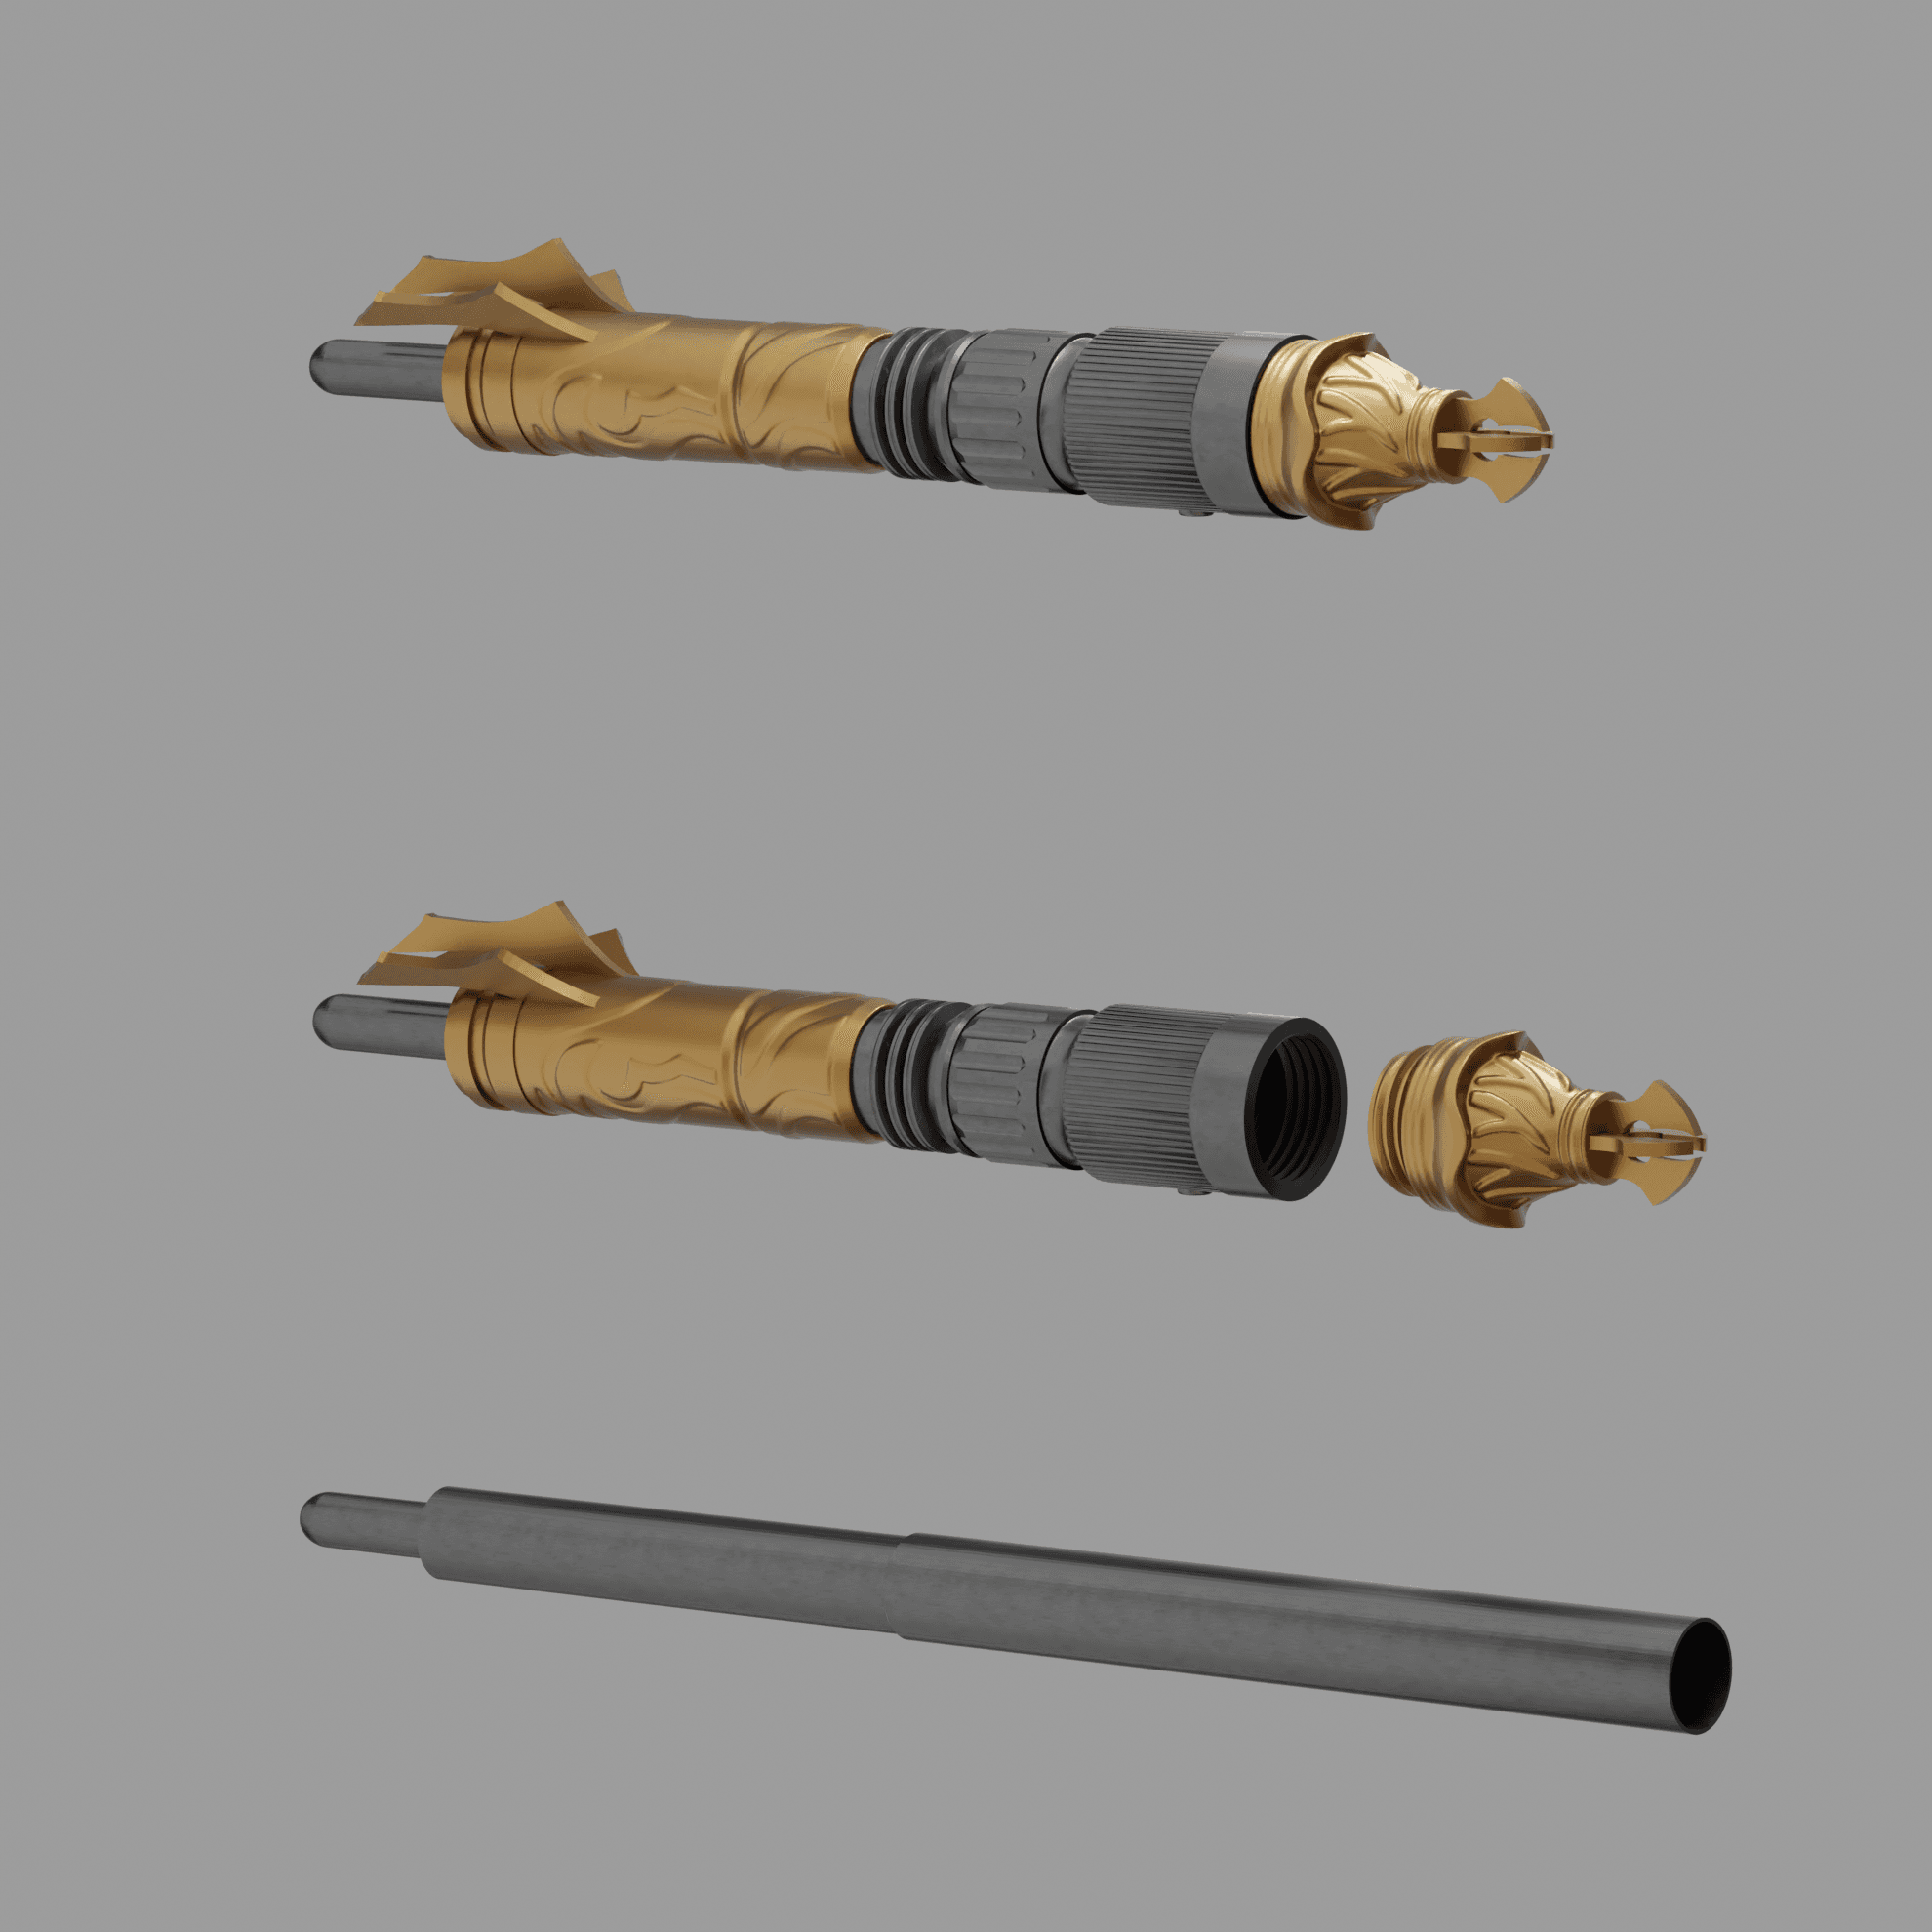 Print in Place Collapsible Jedi Lightsaber Concept 11 3d model